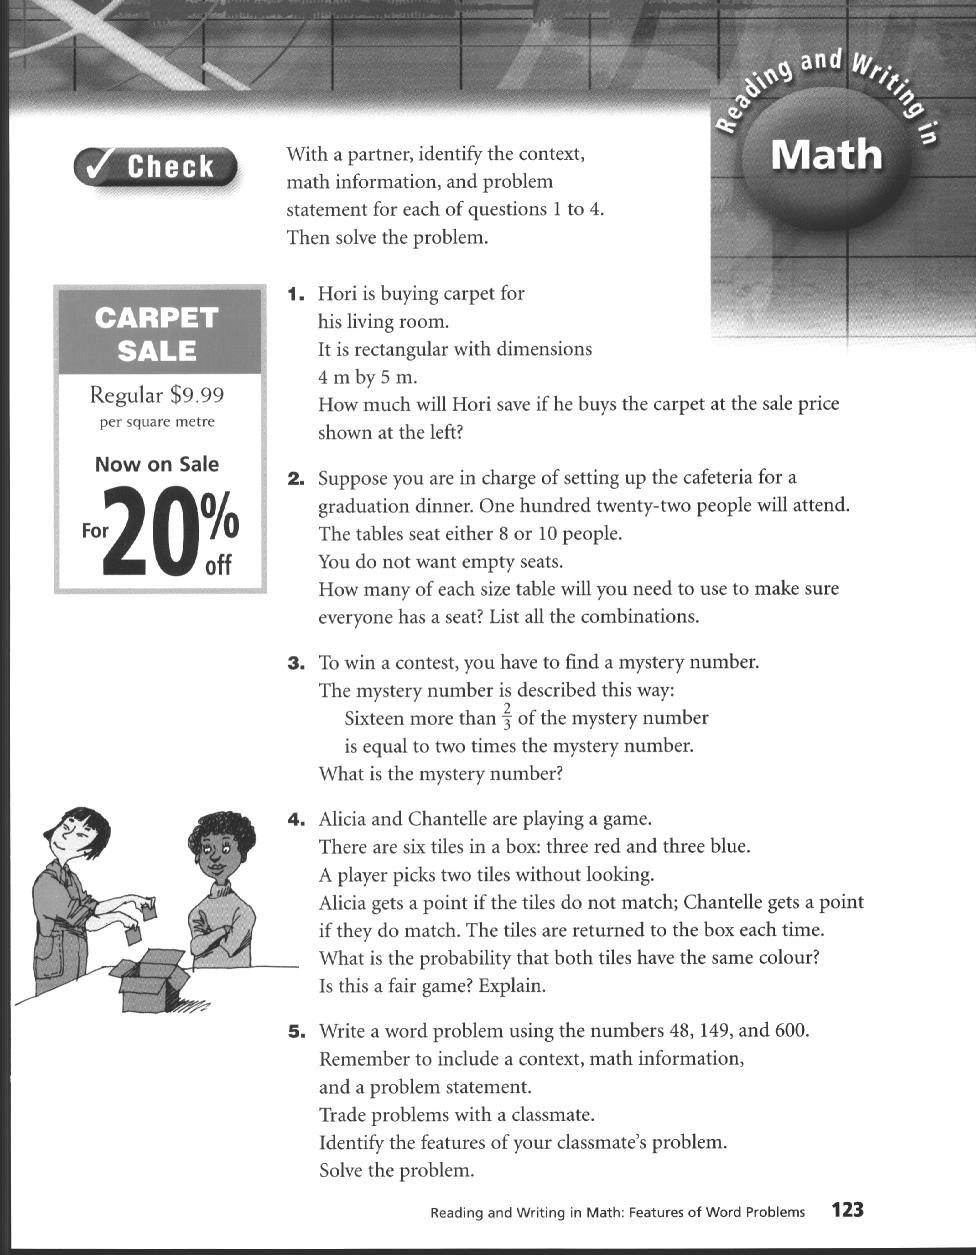 .^' "V Check With a partner, identify the context, math information, and problem statement for each of questions 1 to 4. Then solve the problem. CARPET SALE Regular $9.99 per square metre 1.